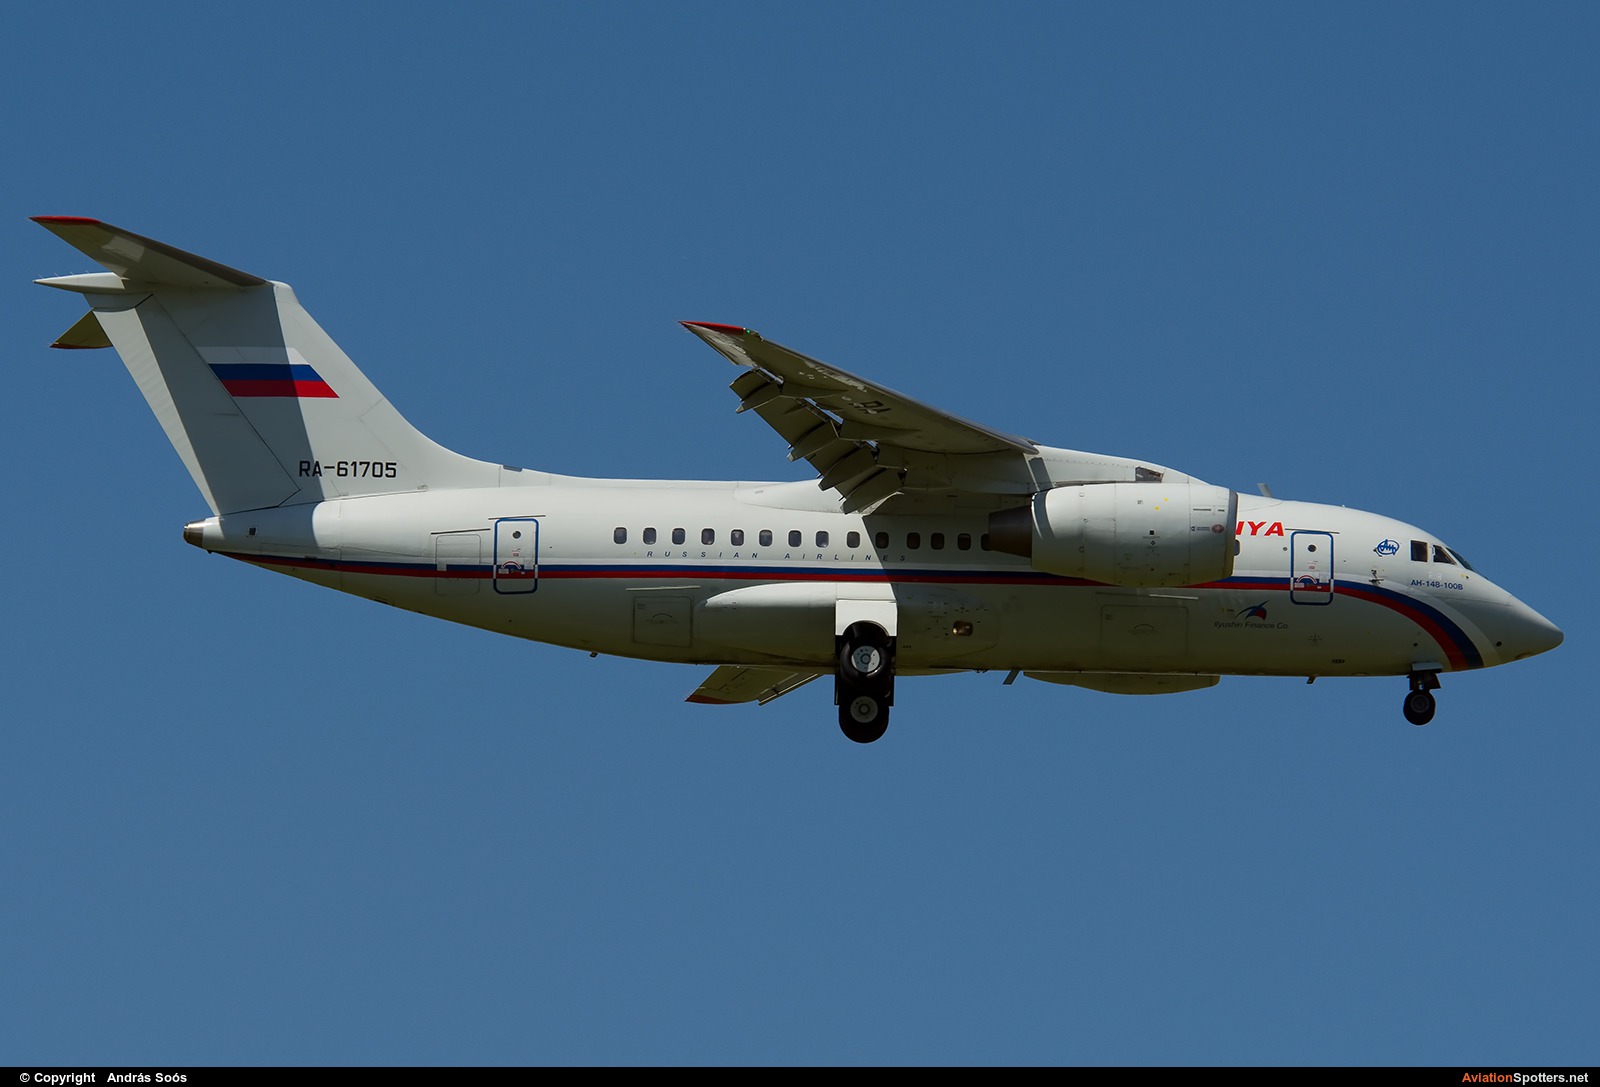 Rossiya Airlines  -  An-148  (RA-61705) By András Soós (sas1965)